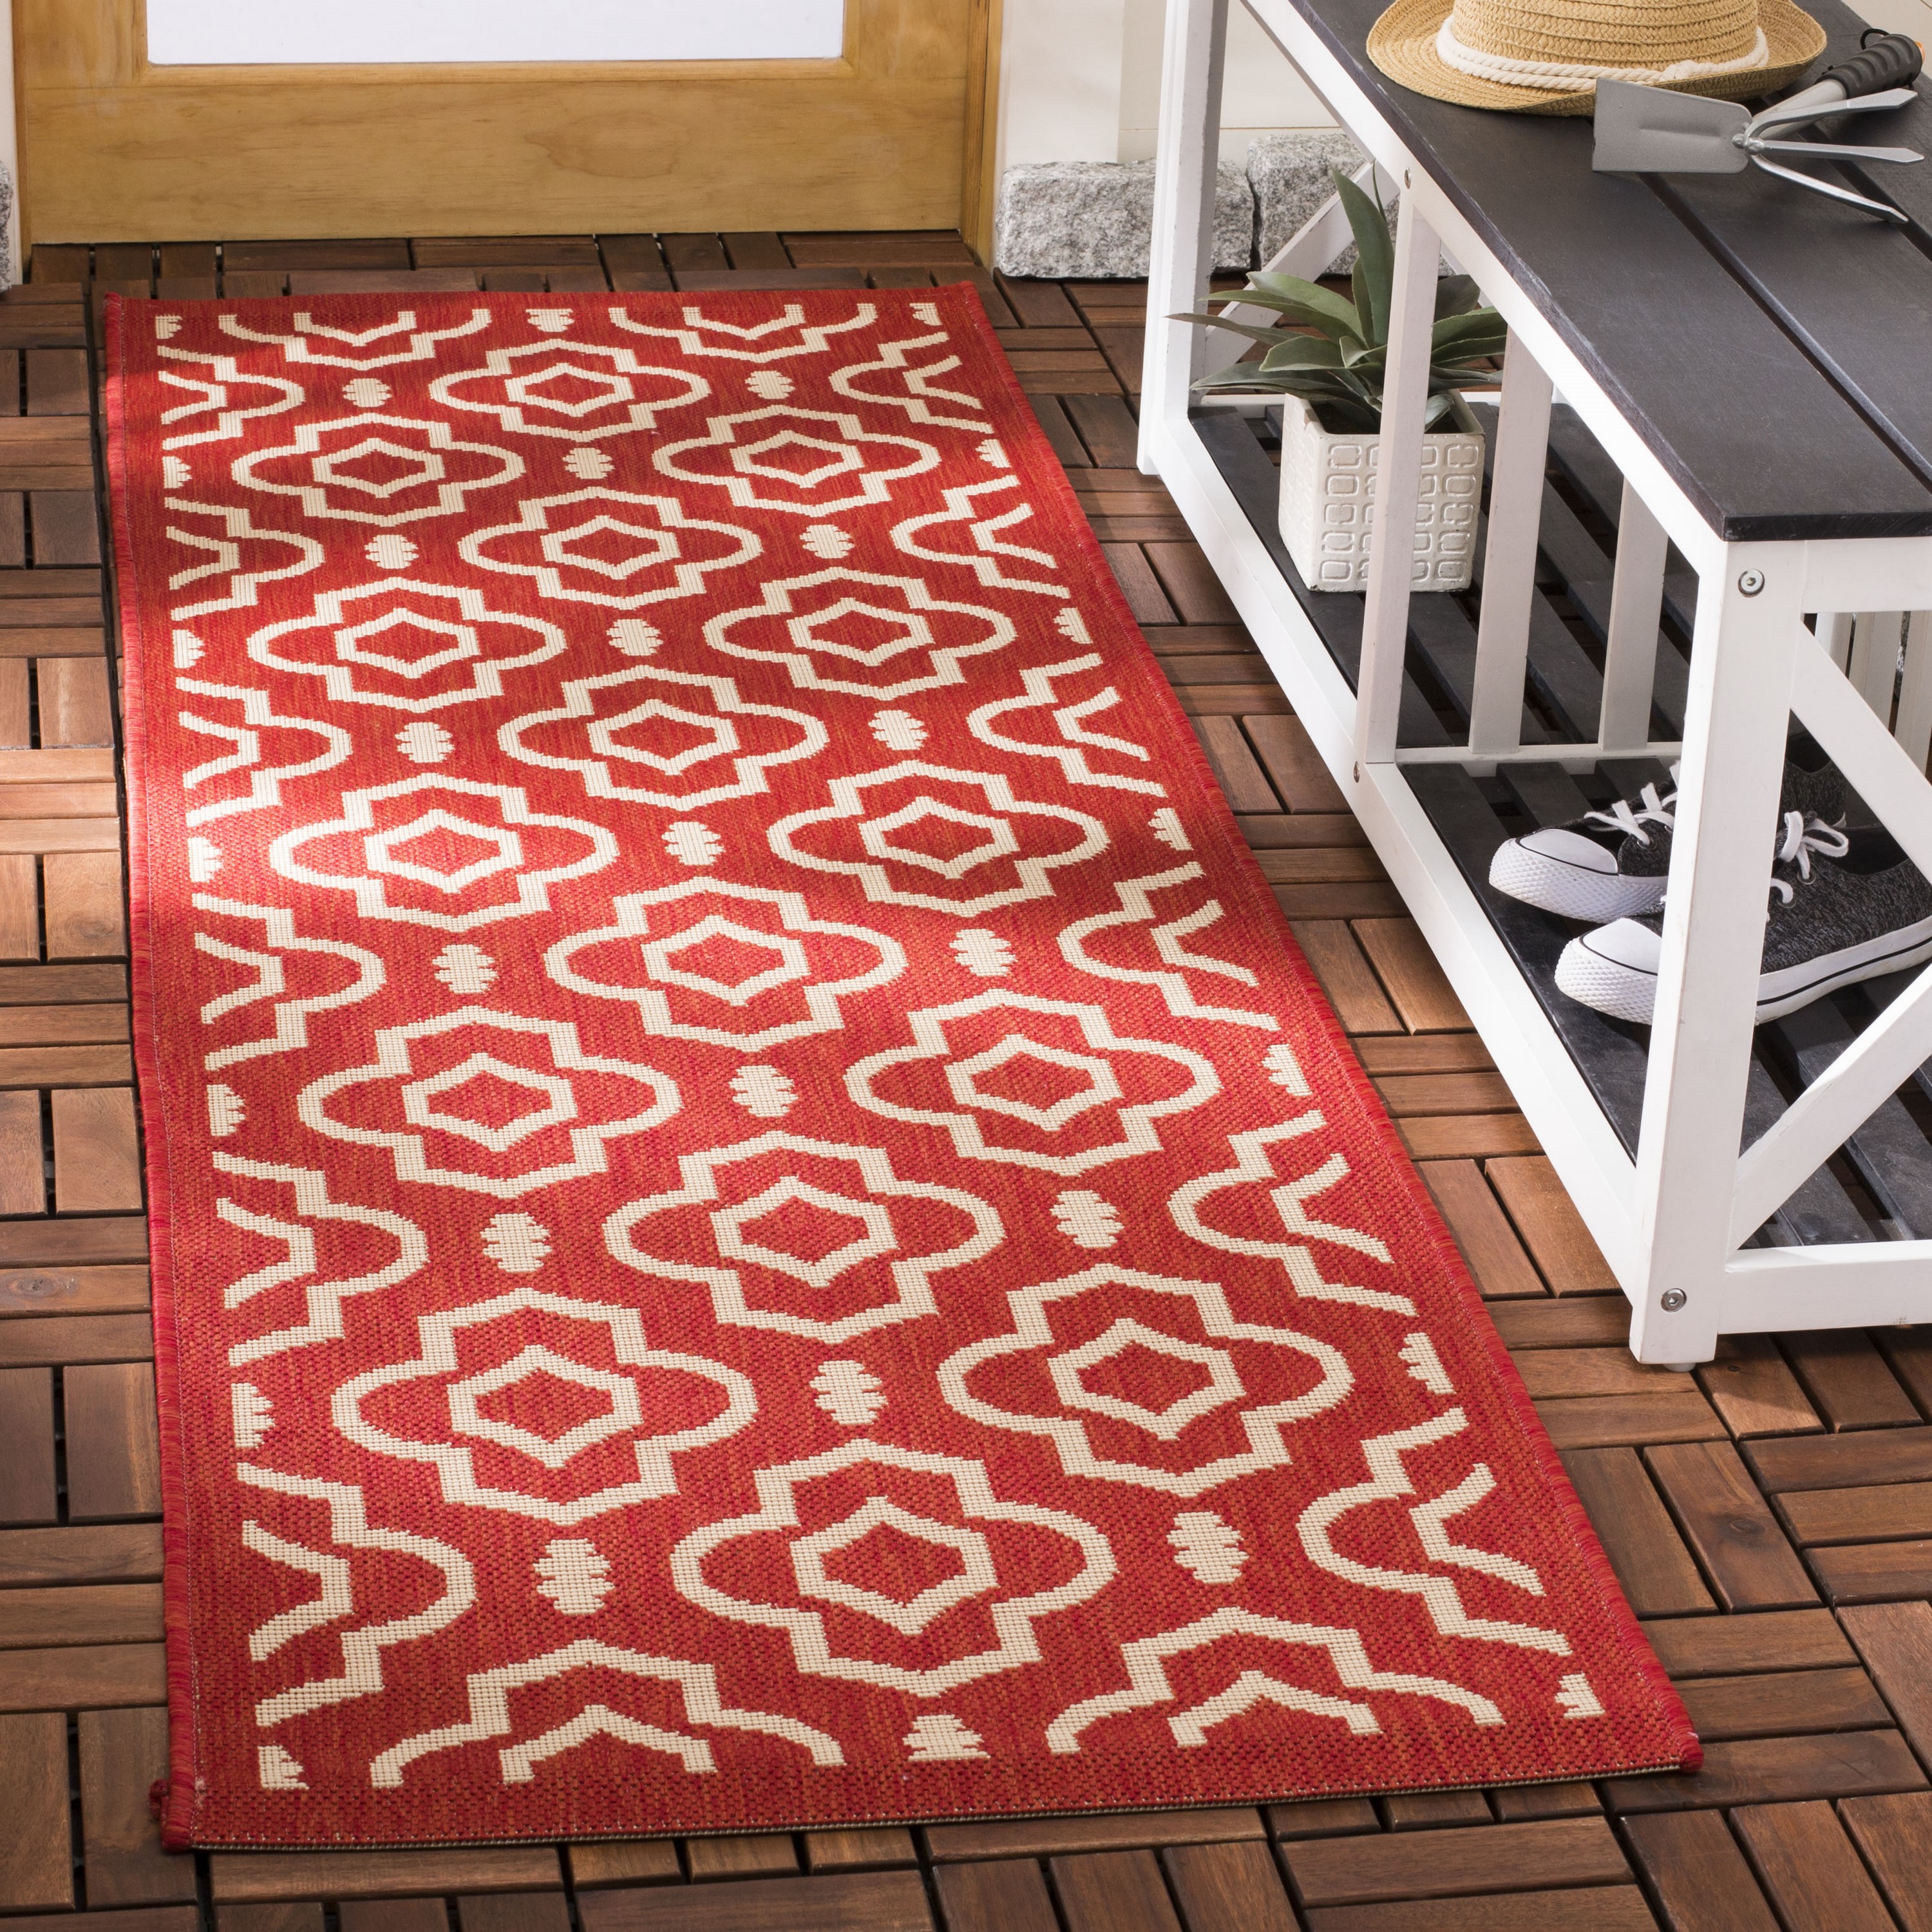 Skid-Resistant Carpet Runner - Burgundy Red - 6 ft. x 27 in. - Many Other Sizes to Choose from